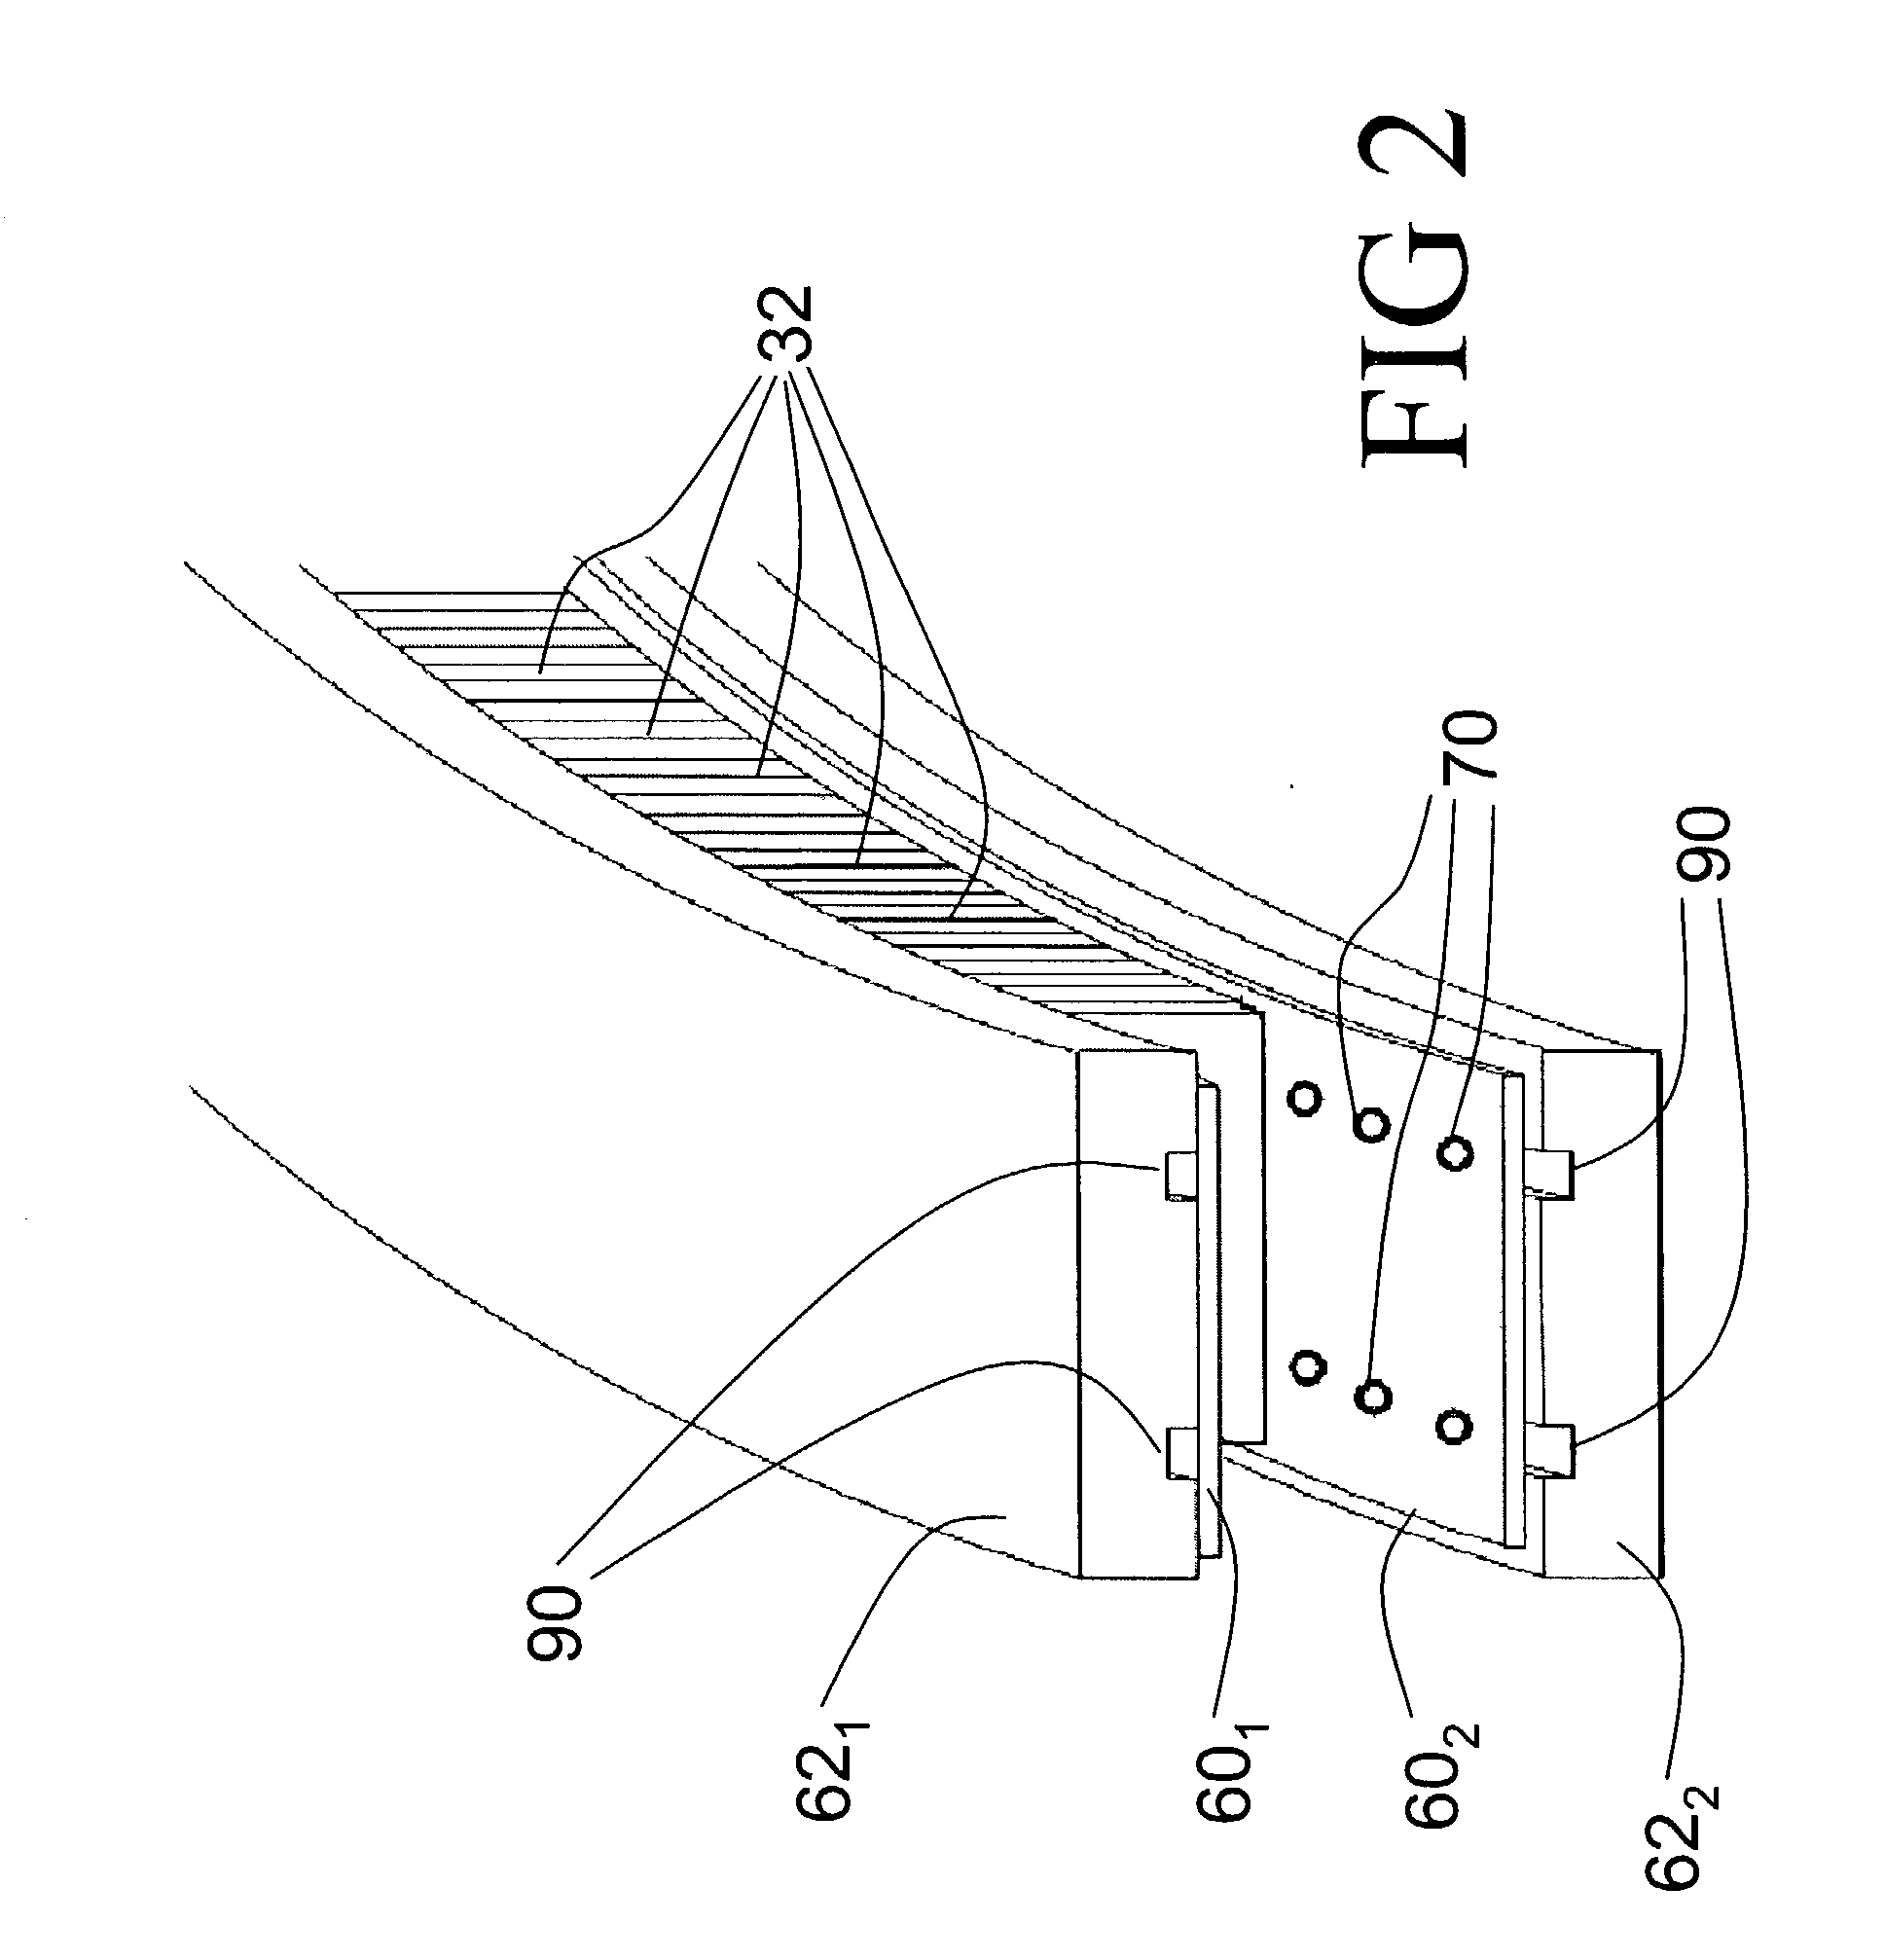 Method and apparatus for alignment of anti-scatter grids for computed tomography detector arrays